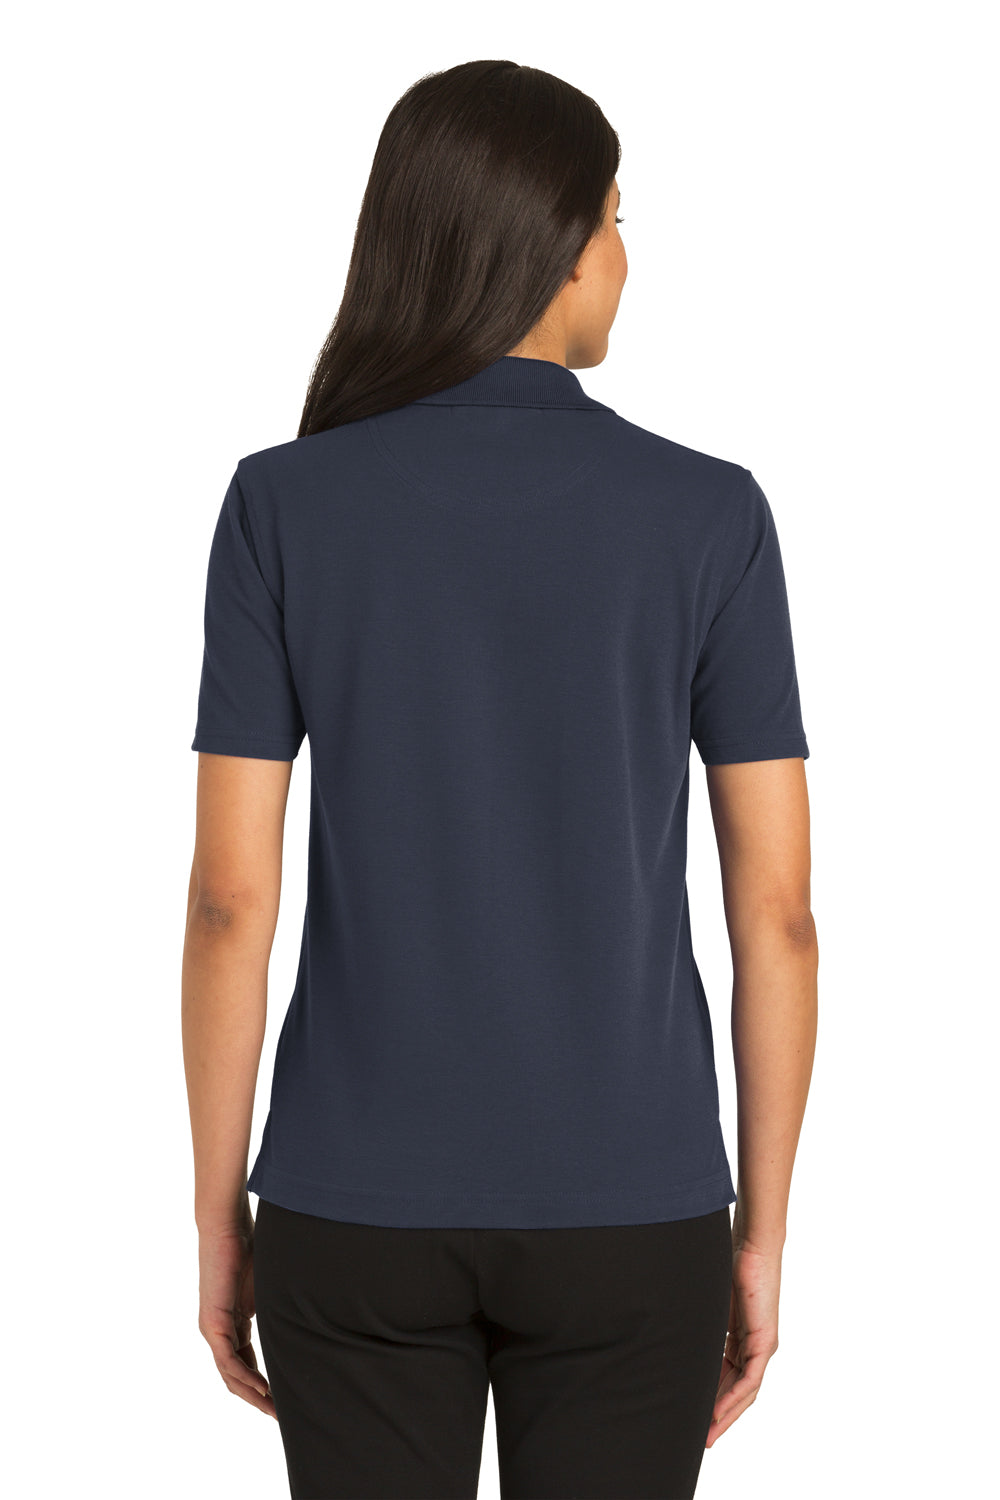 Port Authority L455 Womens Rapid Dry Moisture Wicking Short Sleeve Polo Shirt Navy Blue Back